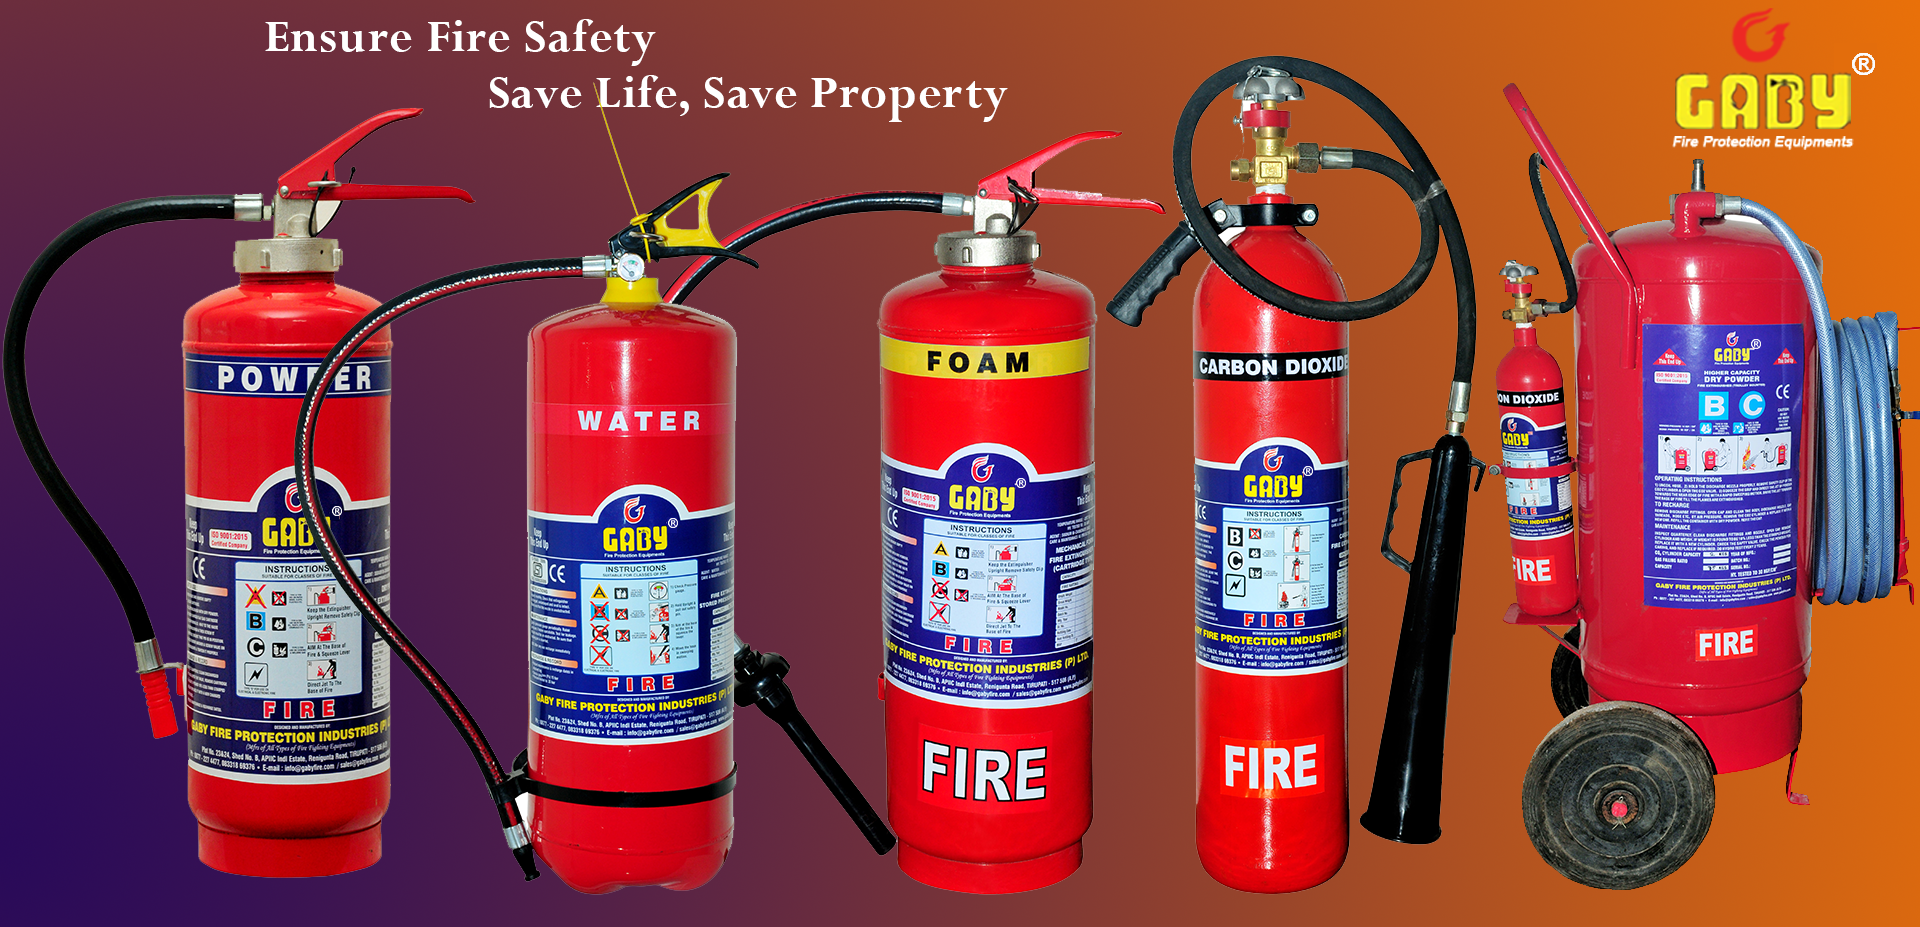 FIRE EXTINGUISHER BALL (AFO) Bangalore, FIRE HOOKS SUPPLIERS Bangalore, FIRE BEATER SUPPLIERS Bangalore, SAFETY SIGNAGE SUPPLIERS Bangalore, BREATHING OPERATORS SUPPLIERS Bangalore, FIRE RETARDANT SUIT SUPPLIERS Bangalore, FIRE BLANKET SUPPLIERS Bangalore, FLAME PROOF TORCH SUPPLIERS Bangalore, RECHARGEABLE TORCHES SUPPLIERS Bangalore, PVC SAFETY CONES SUPPLIERS Bangalore, ROAD SAFETY EQUIPMENTS SUPPLIERS Bangalore, FIRE SPRINKLER NOZZLES SUPPLIERS Bangalore, FIRE SPRINKLER DROPS SUPPLIERS Bangalore, FIRE SPRINKLER SYSTEM CONTRACTORS Bangalore, FIRE SPRINKLER SYSTEM CONTRACTORS Bangalore, FIRE ALARM EQUIPMENTS SUPPLIERS Bangalore, SMOKE DETECTOR SUPPLIERS Bangalore, FIRE ALARM PANEL SUPPLIERS Bangalore, FIRE ALARM SYSTEM CONTRACTORS Bangalore, INDUSTRIAL SIREN SUPPLIERS Bangalore, FIRE EXTINGUISHERS MANUFACTURERS Bangalore, FIRE EXTINGUISHERS DISTRIBUTORS Bangalore, FIRE EXTINGUISHERS DEALERS Bangalore,  FIRE EXTINGUISHERS SUPPLIERS Bangalore, FIRE PROTECTION EQUIPMENTS SUPPLIERS Bangalore, FIRE PROTECTION EQUIPMENTS MANUFACTURERS Bangalore, FIRE SAFETY EQUIPMENTS MANUFACTURERS Bangalore, FIRE SAFETY EQUIPMENTS SUPPLIERS Bangalore, FIRE SAFETY EQUIPMENTS DEALERS Bangalore, FIRE FIGHTING EQUIPMENTS MANUFACTURERS Bangalore, FIRE FIGHTING EQUIPMENTS SUPPLIERS Bangalore, FIRE FIGHTING EQUIPMENTS DEALERS Bangalore, FIRE FIGHTING EQUIPMENTS CONTRACTORS Bangalore, FIRE PROTECTION SYSTEM CONTRACTORS Bangalore, FIRE PROTECTION SYSTEM EQUIPMENT SUPPLIERS Bangalore, FIRE HYDRANT SYSTEMS ERECTION CONTRACTORS Bangalore, FIRE HYDRANT EQUIPMENTS SUPPLIERS Bangalore, FIRE HYDRANT EQUIPMENTS MANUFACTURERS Bangalore, FIRE HYDRANT VALVES MANUFACTURERS Bangalore, FIRE HOSE BOXES MANUFACTURERS Bangalore, FIRE FIGHTING HOSES SUPPLIERS Bangalore, FIRE HOSE COUPLING MANUFACTURERS Bangalore, FIRE HOSE NOZZLES SUPPLIERS Bangalore, FIRE HOSE REEL DRUMS MANUFACTURERS Bangalore, FIRE FIGHTING PUMPS SUPPLIERS Bangalore, FIRE WATER MONITORS Bangalore, FIRE FOAM MONITORS Bangalore, FB X WITH PICK UP TUBE Bangalore, FIRE FIGHTING NOZZLES Bangalore, PORTABLE FIRE PUMPS Bangalore, TROLLEY MOUNTED FOAM TANKS Bangalore, FOAM SOLUTIONS (AFFF) Bangalore, FIRE FIGHTING FOAM CHEMICALS Bangalore, FIRE FIGHTING CHEMICALS Bangalore, FIRE EXTINGUISHERS ACCESSORIES Bangalore, FIRE EXTINGUISHERS SPARES Bangalore, SAFETY EQUIPMENTS SUPPLIERS Bangalore, FIRE HYDRANT EQUIPMENT ACCESSORIES SUPPLIERS Bangalore, INDUSTRIAL SAFETY EQUIPMENTS SUPPLIERS Bangalore, PERSONAL PROTECTIVE EQUIPMENTS SUPPLIERS Bangalore,